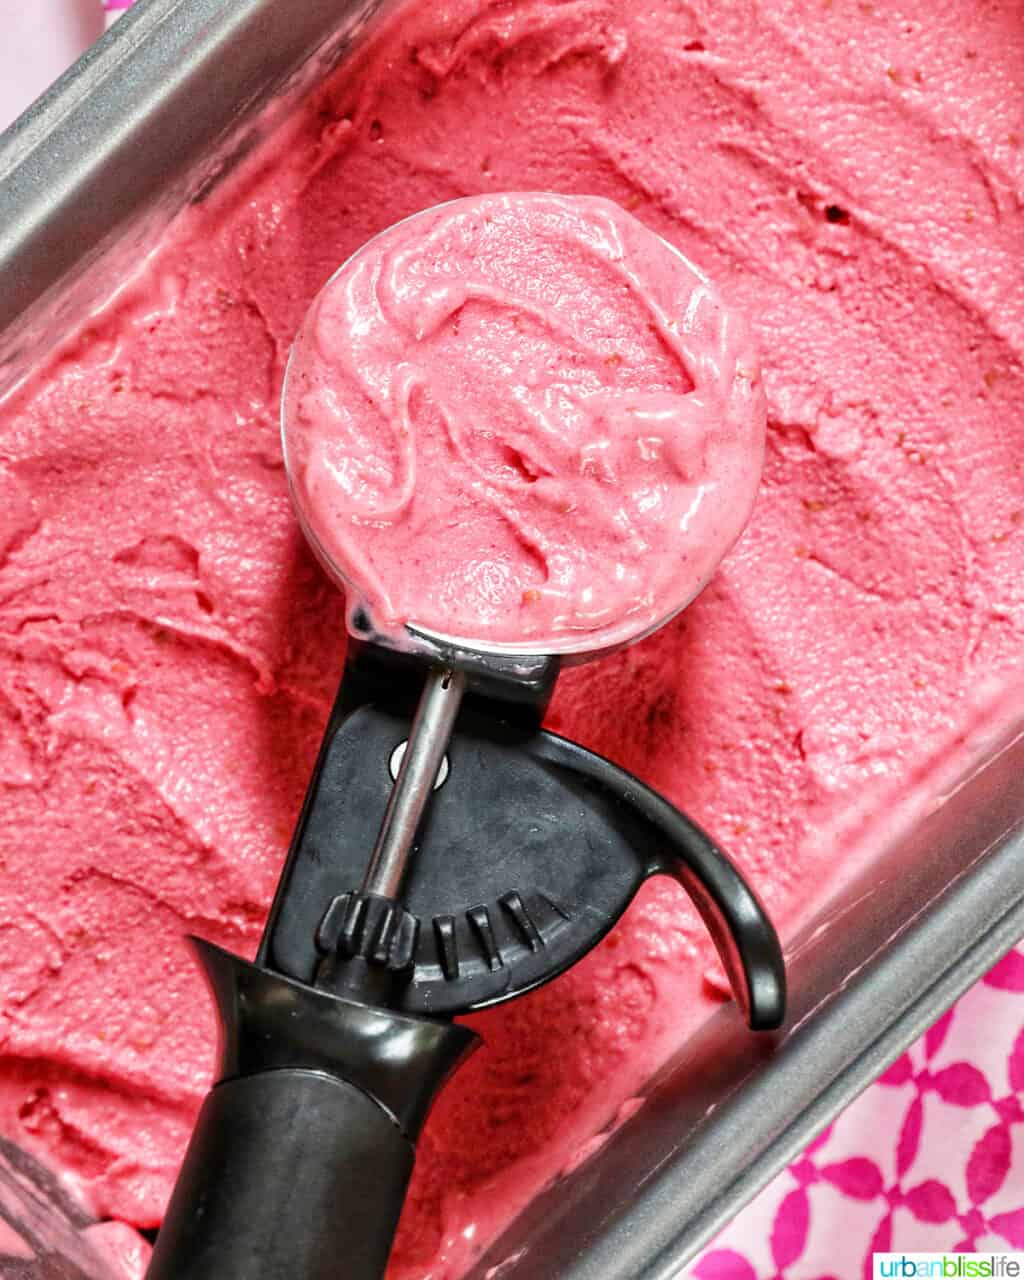 ice cream scoop filled with raspberry sherbet on top of a pan filled with raspberry sherbet.